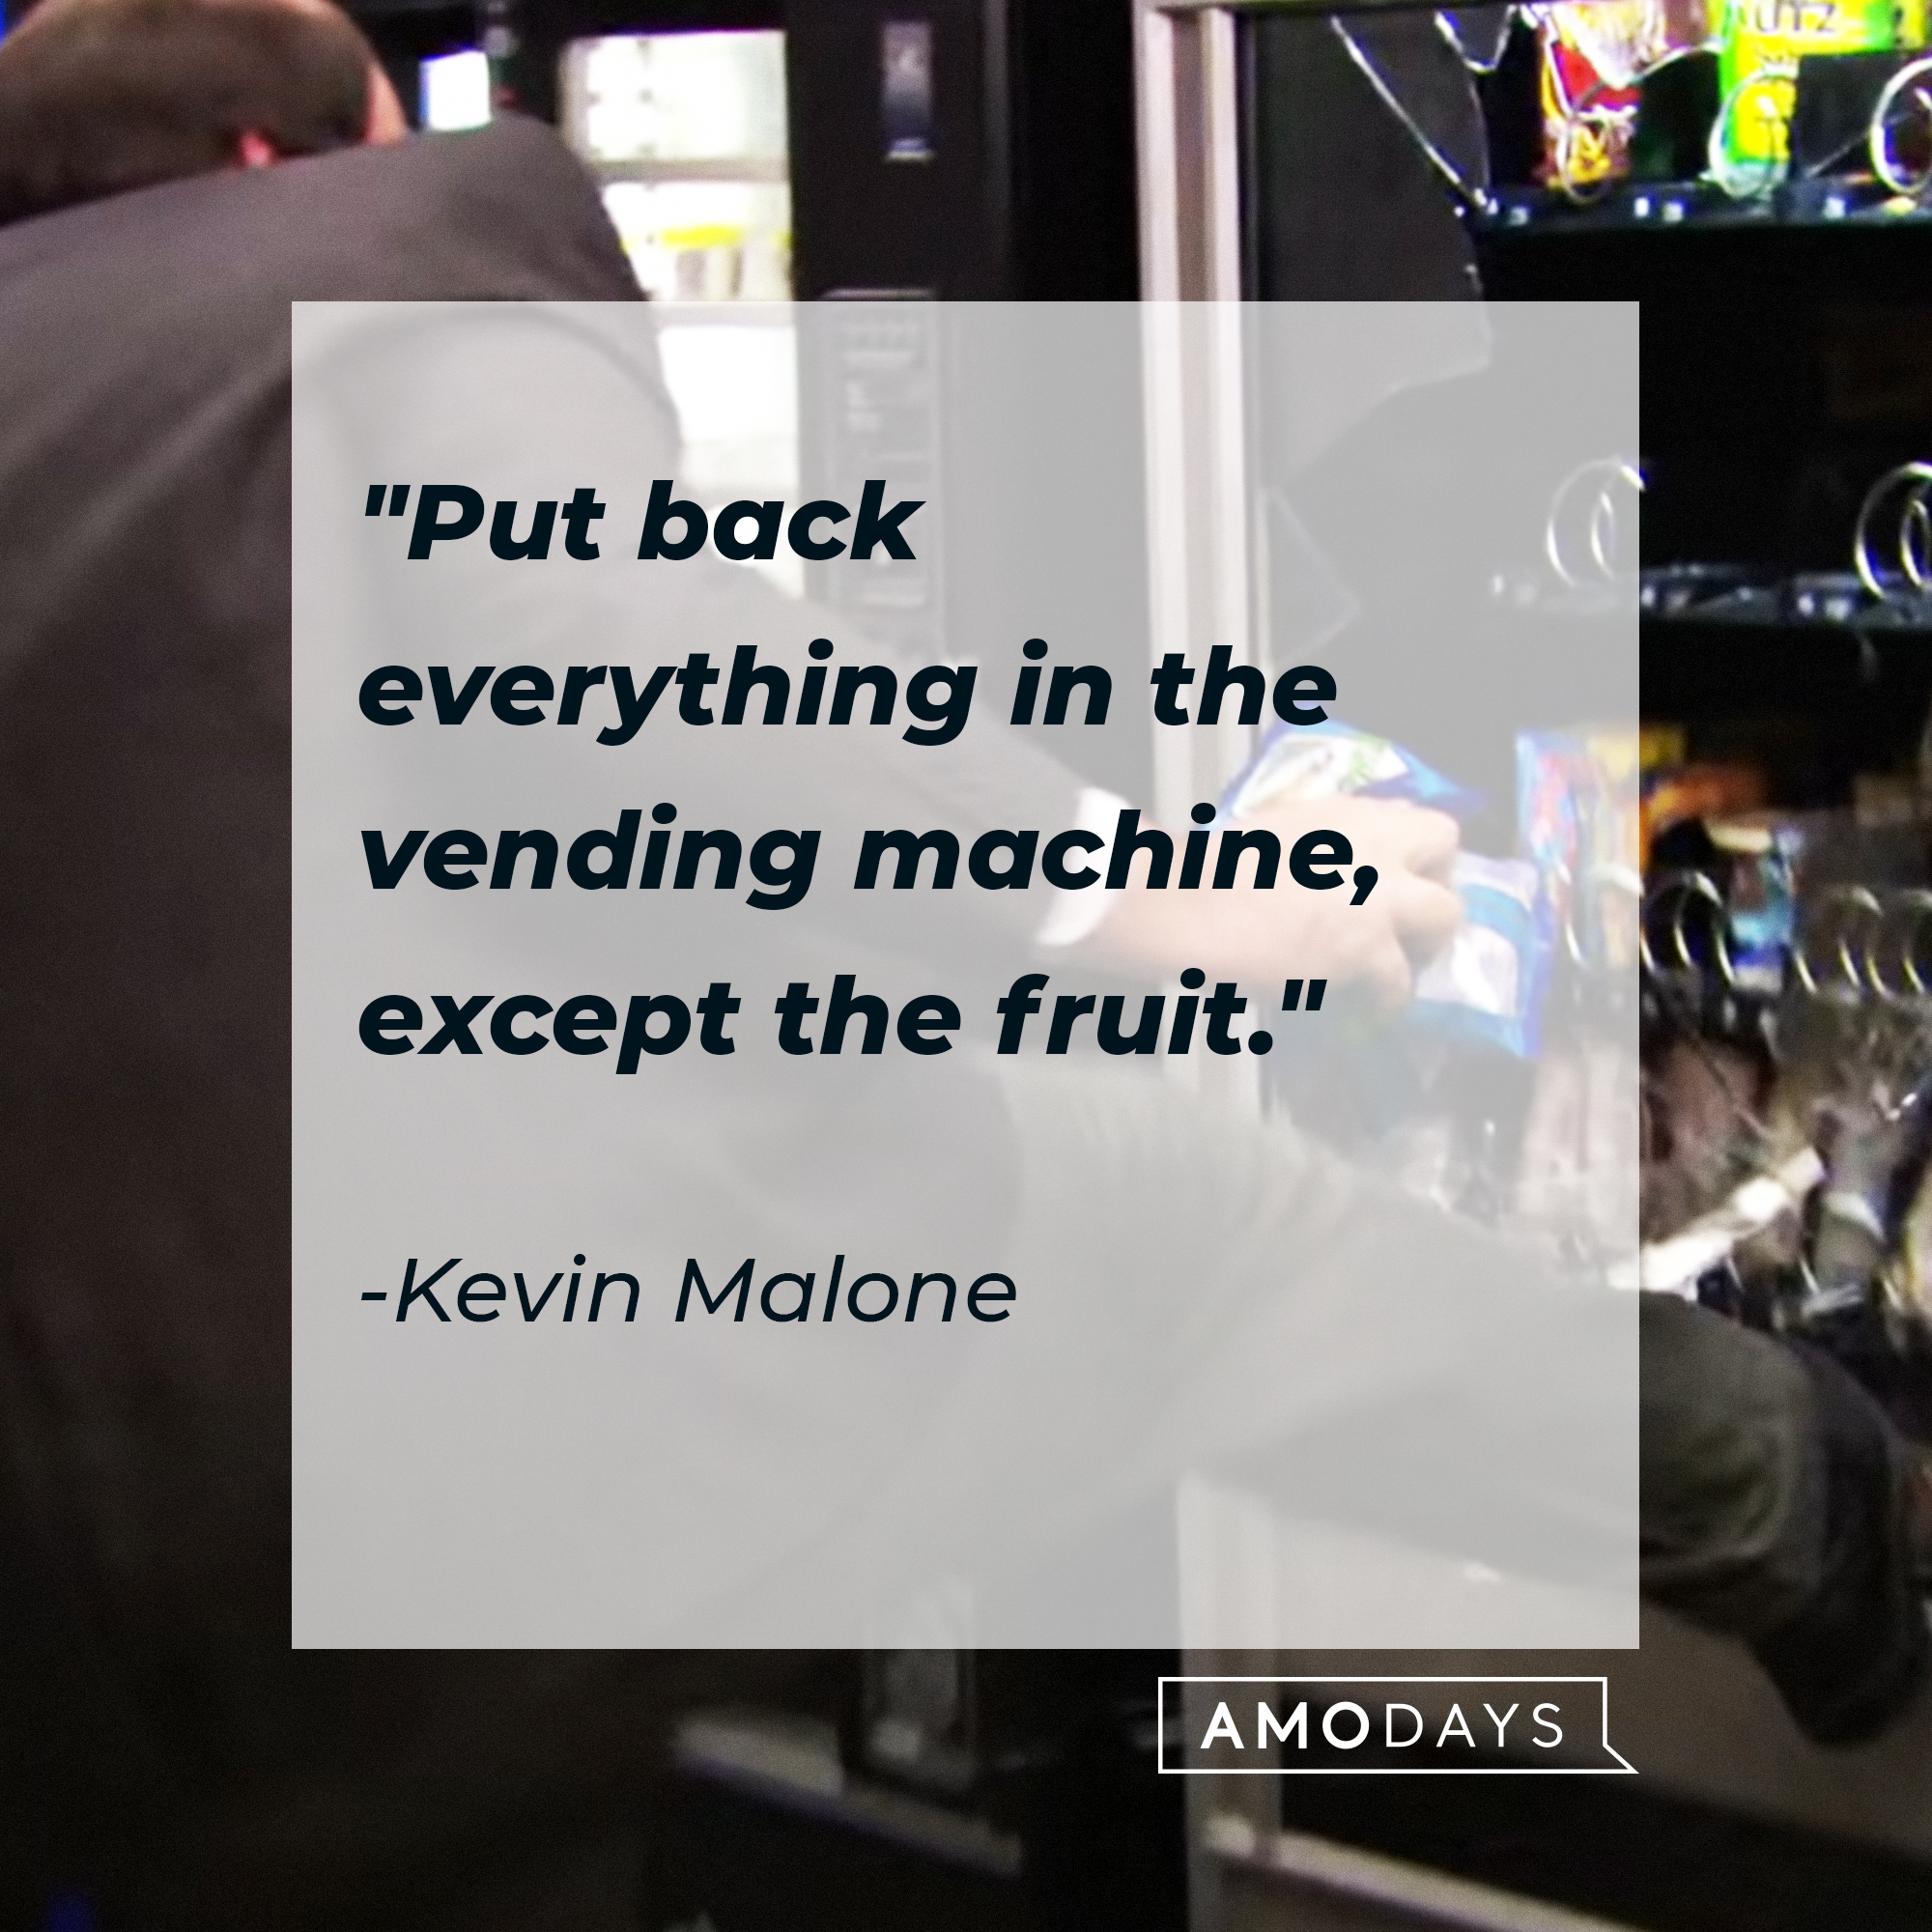 An image of Kevin Malone, with his quote: “Put back everything in the vending machine, except the fruit.” | Source: Youtube.com/The Office